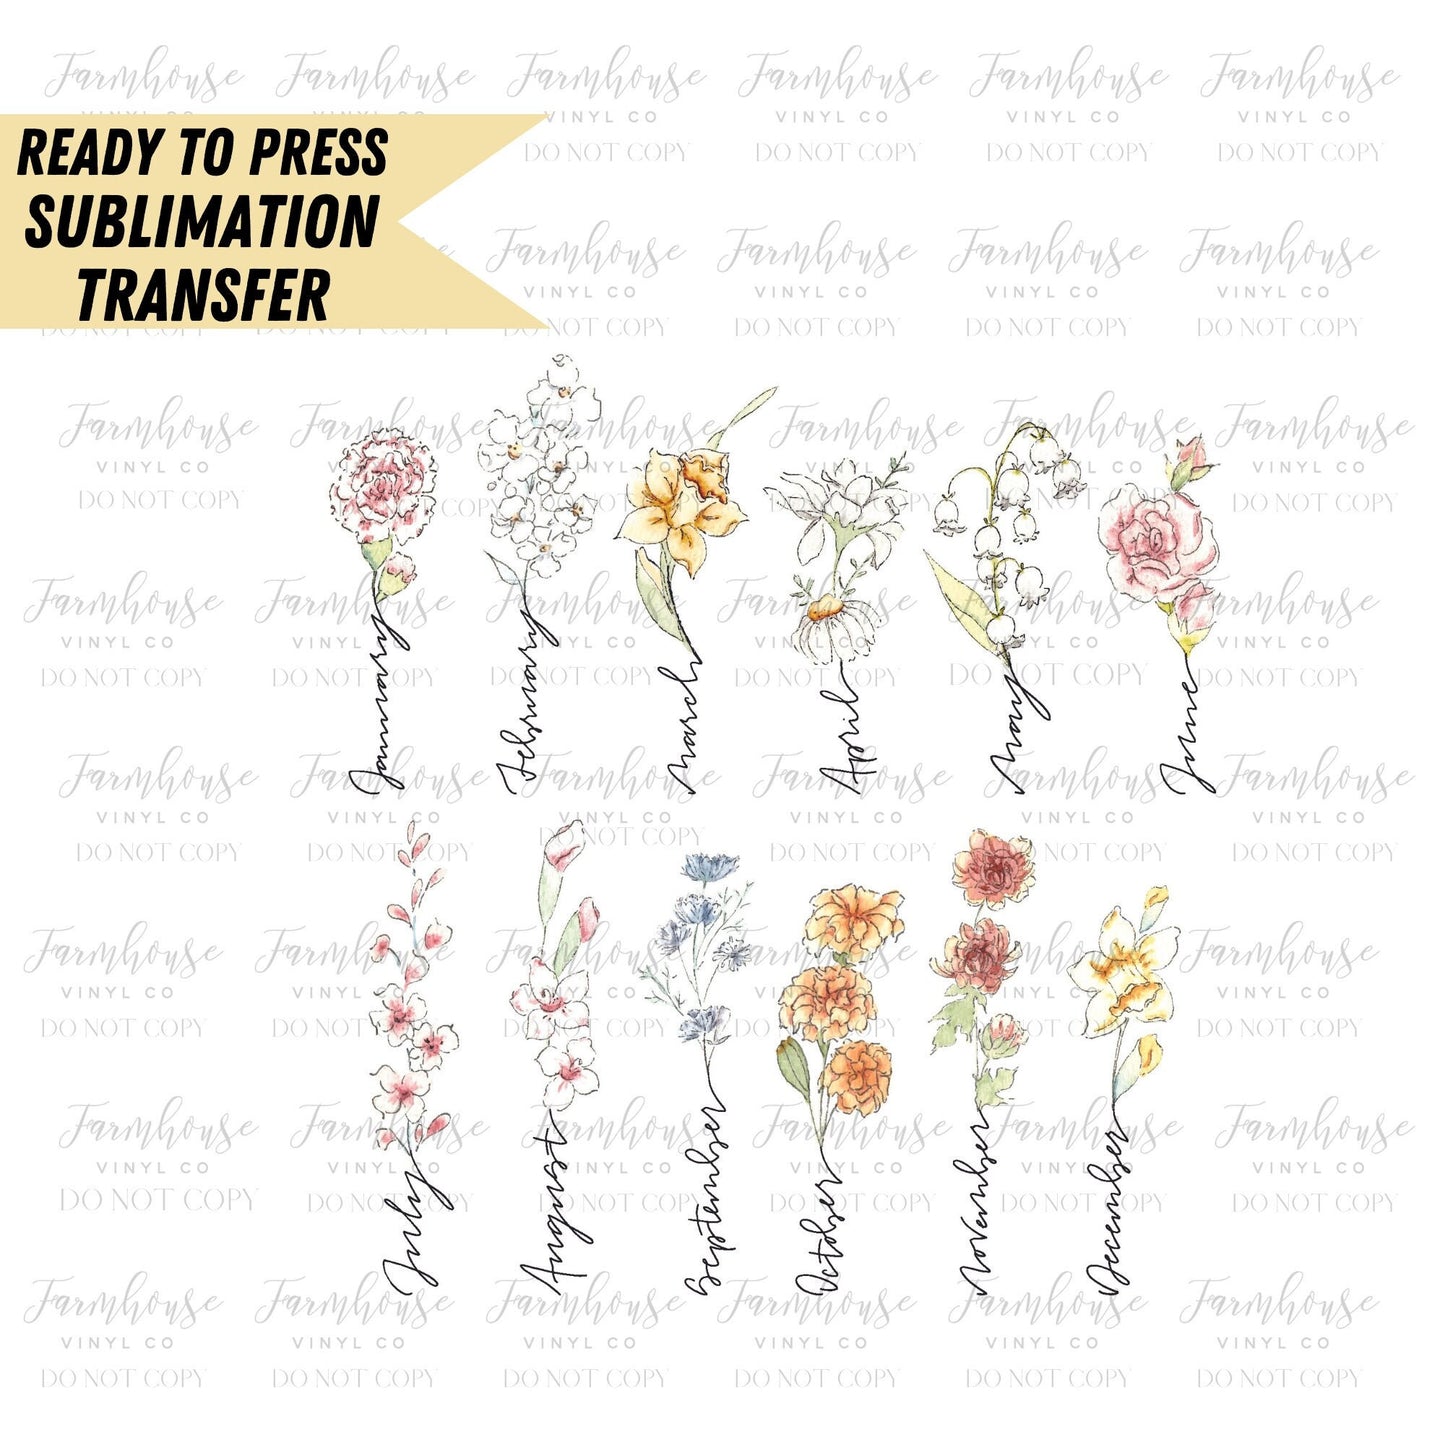 Birthday Month Flowers, Ready to Press Sublimation Transfer, Sublimation Transfers, Floral Chart, Birth Month Flowers Design, Floral Chic - Farmhouse Vinyl Co